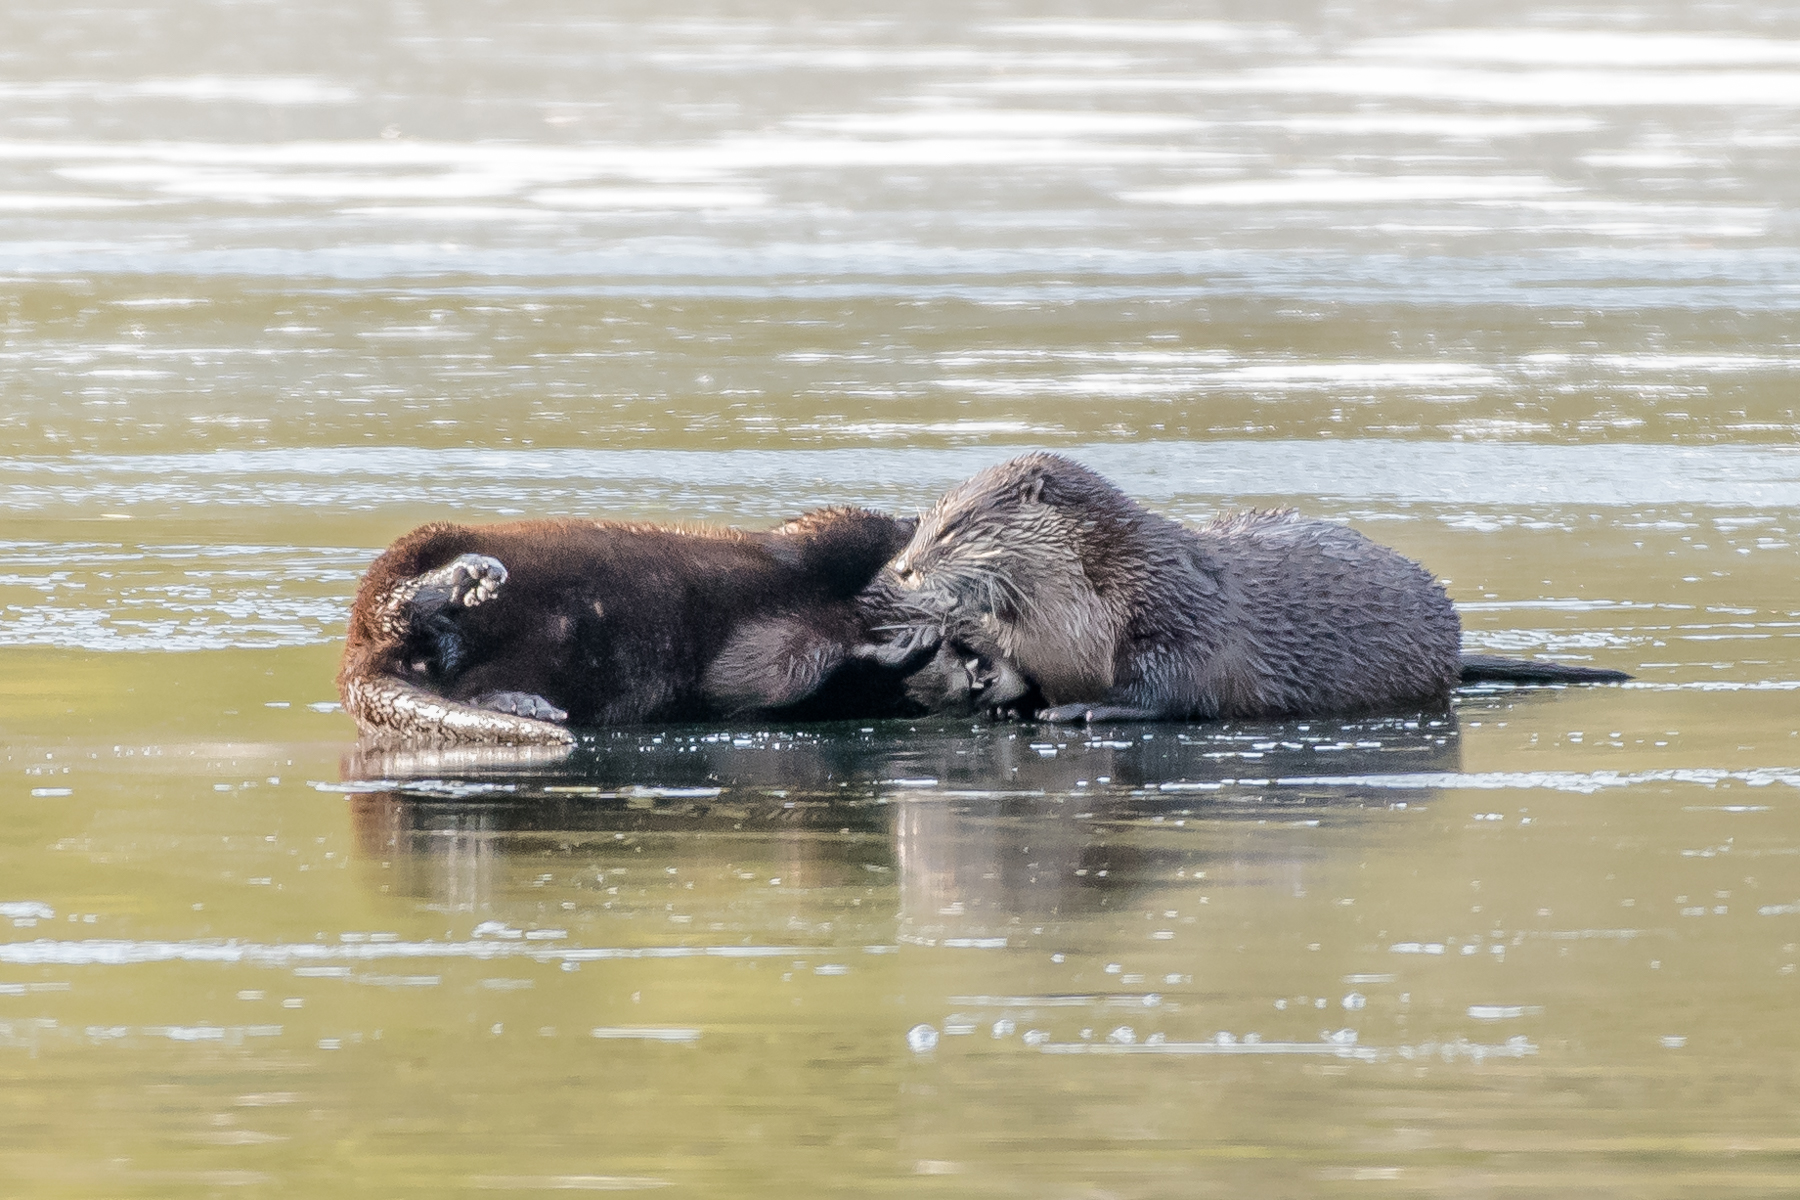   Nothin like a "good ole wrasslin match" with a family member on the ice during breakfast. &nbsp;Notice the mouth full of teeth just below the otter on the right's neck ! &nbsp;  